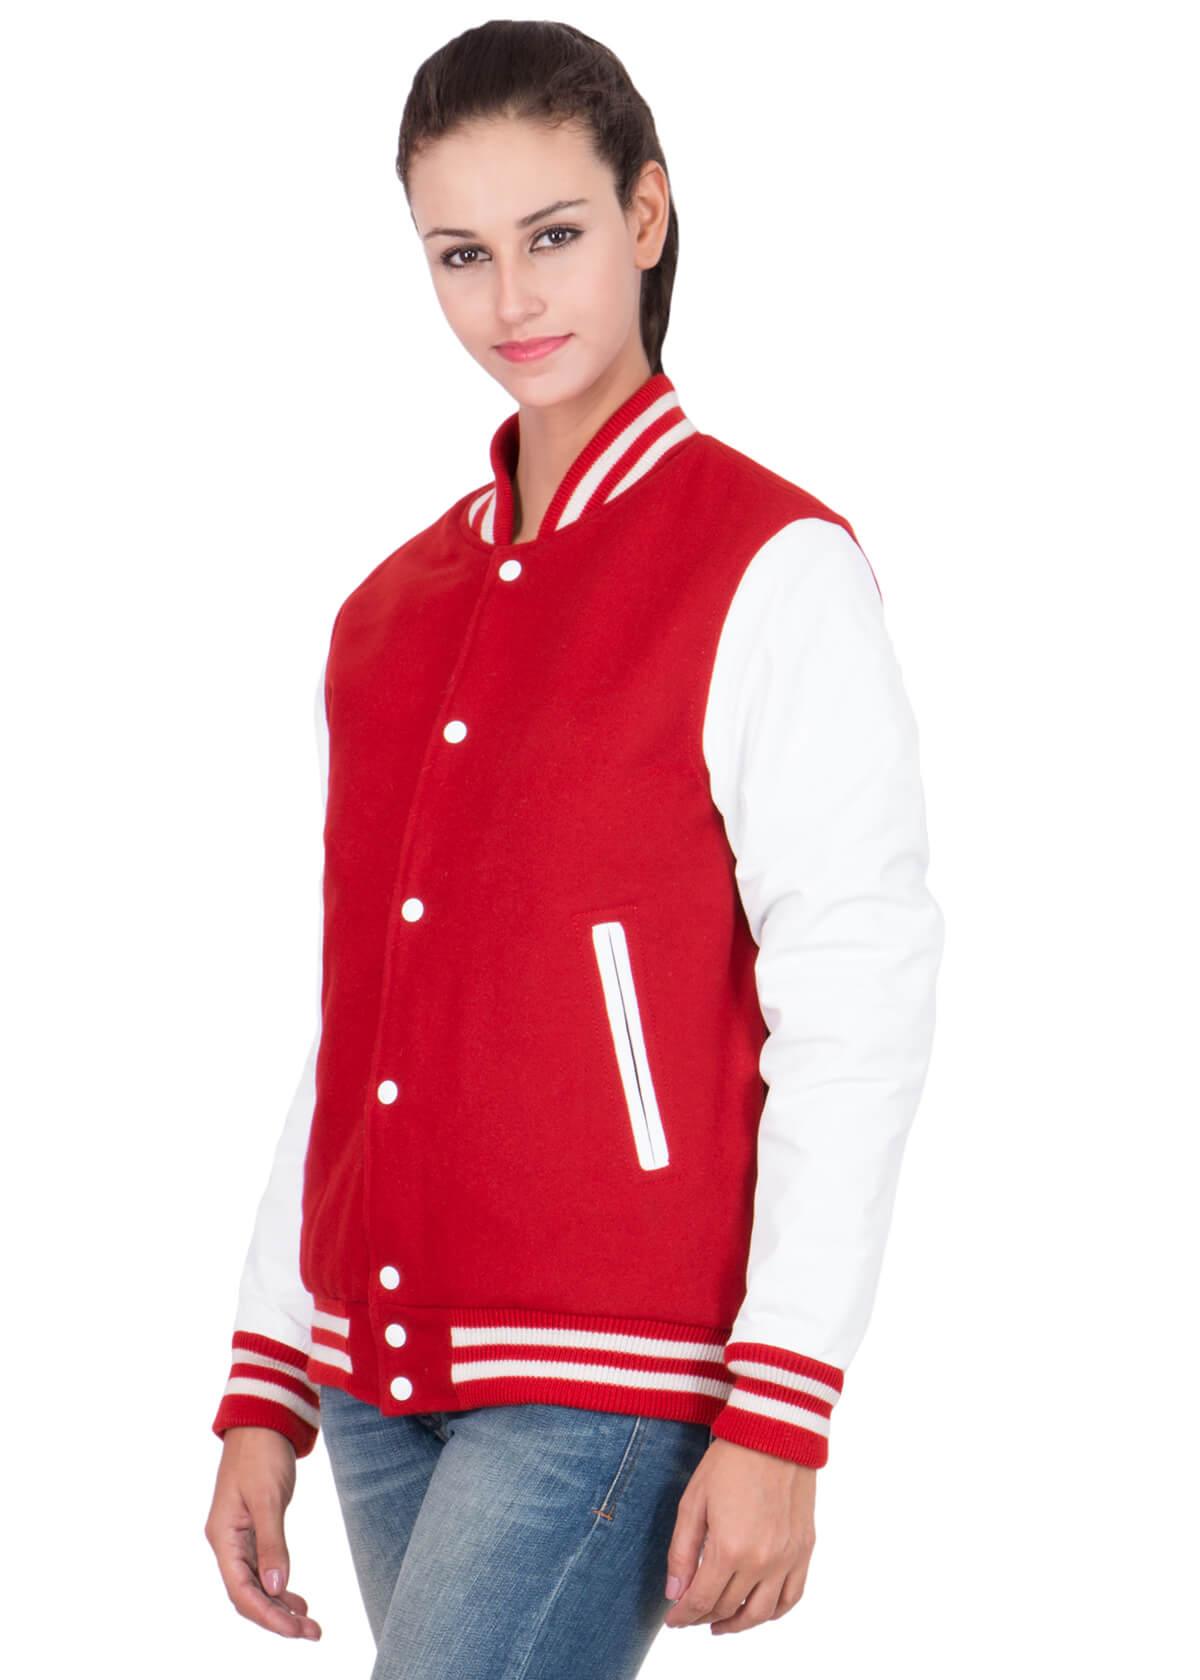 Womens Scarlet Red Varsity Jacket with White Leather Sleeves-4